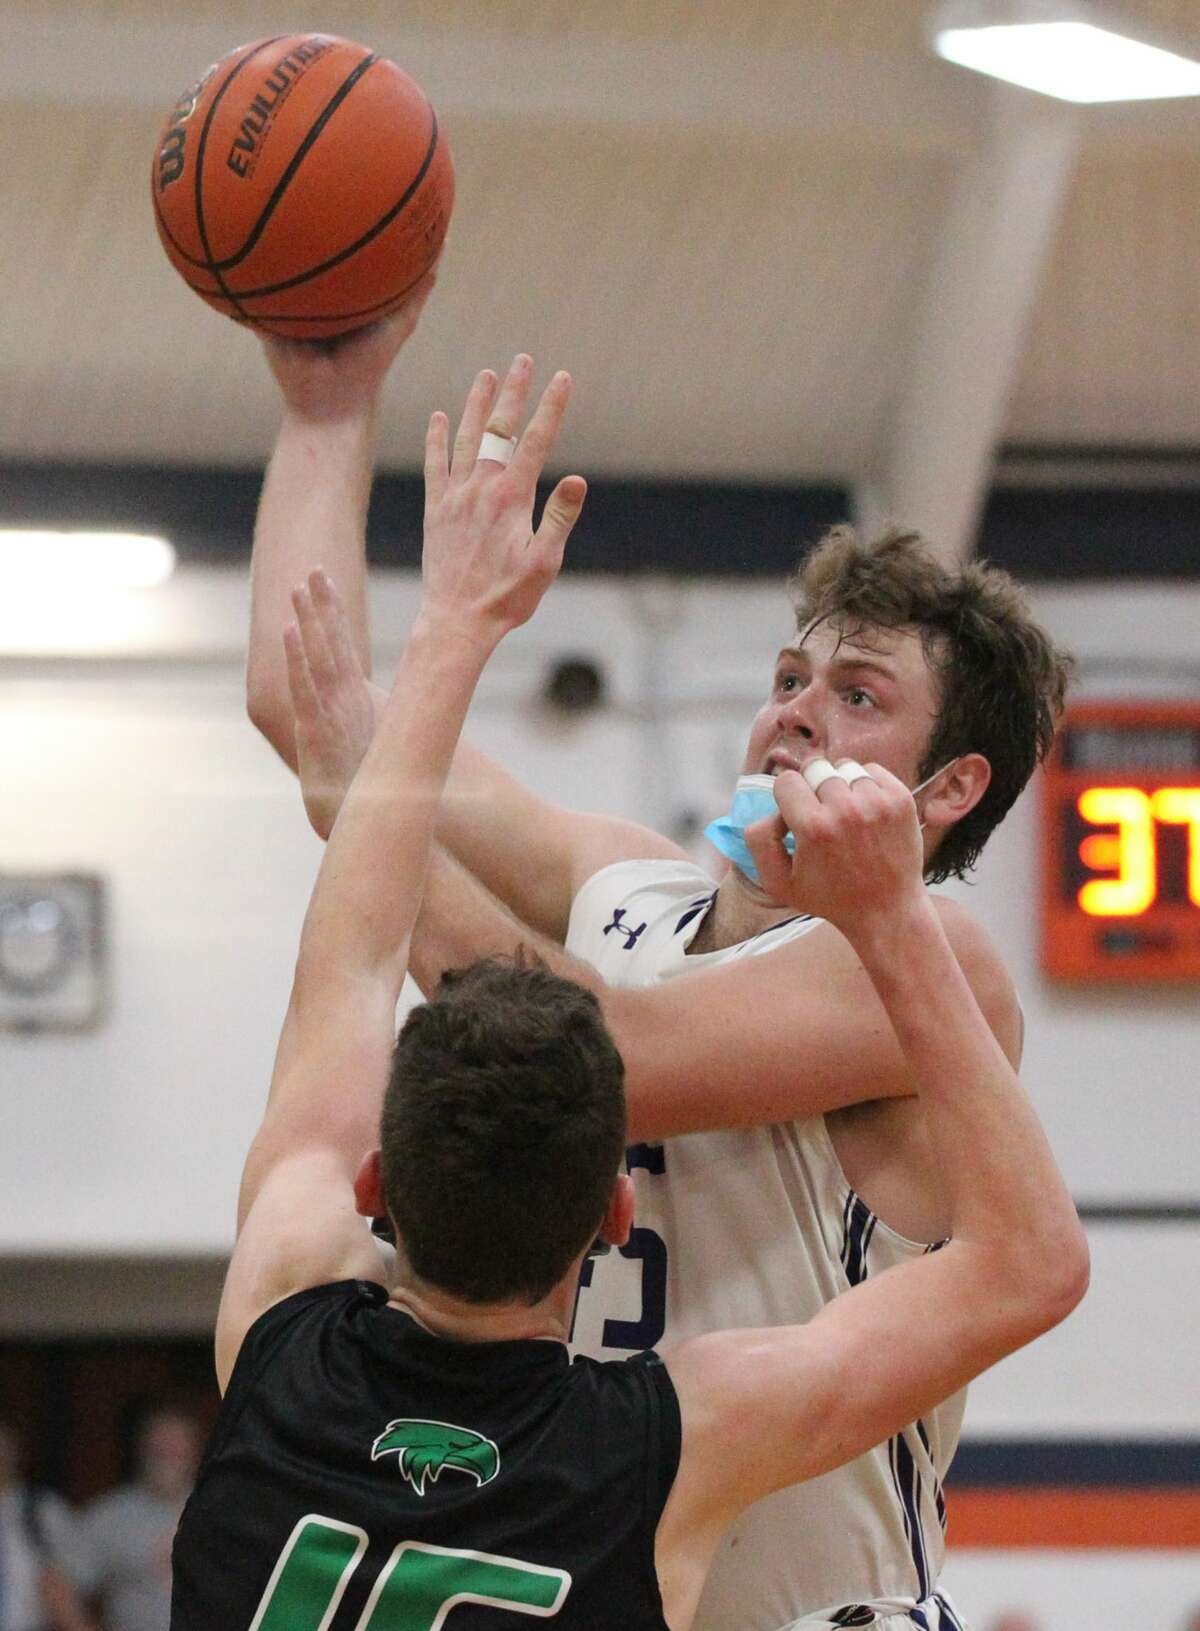 Action from the Routt boys' basketball team's game against Macon Meridian for the championship of the Gene Bergschneider Tournament in New Berlin last Saturday.